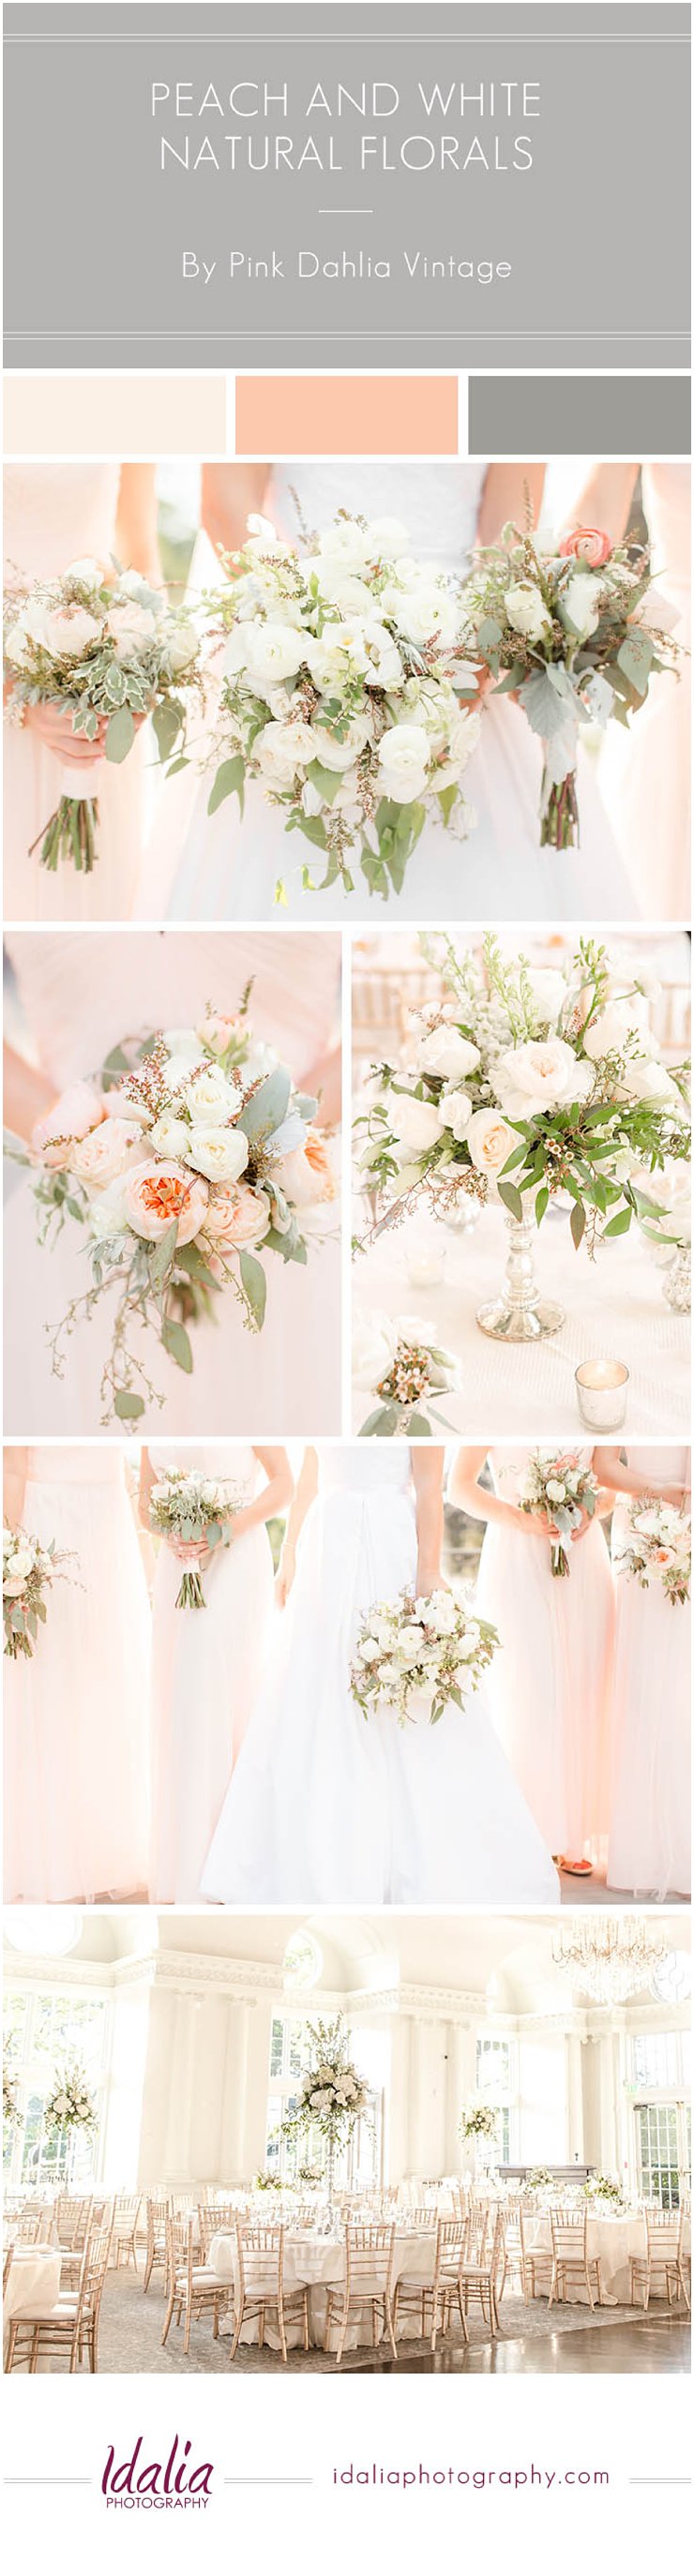 Peach and White Natural Florals by Pink Dahlia Vintage